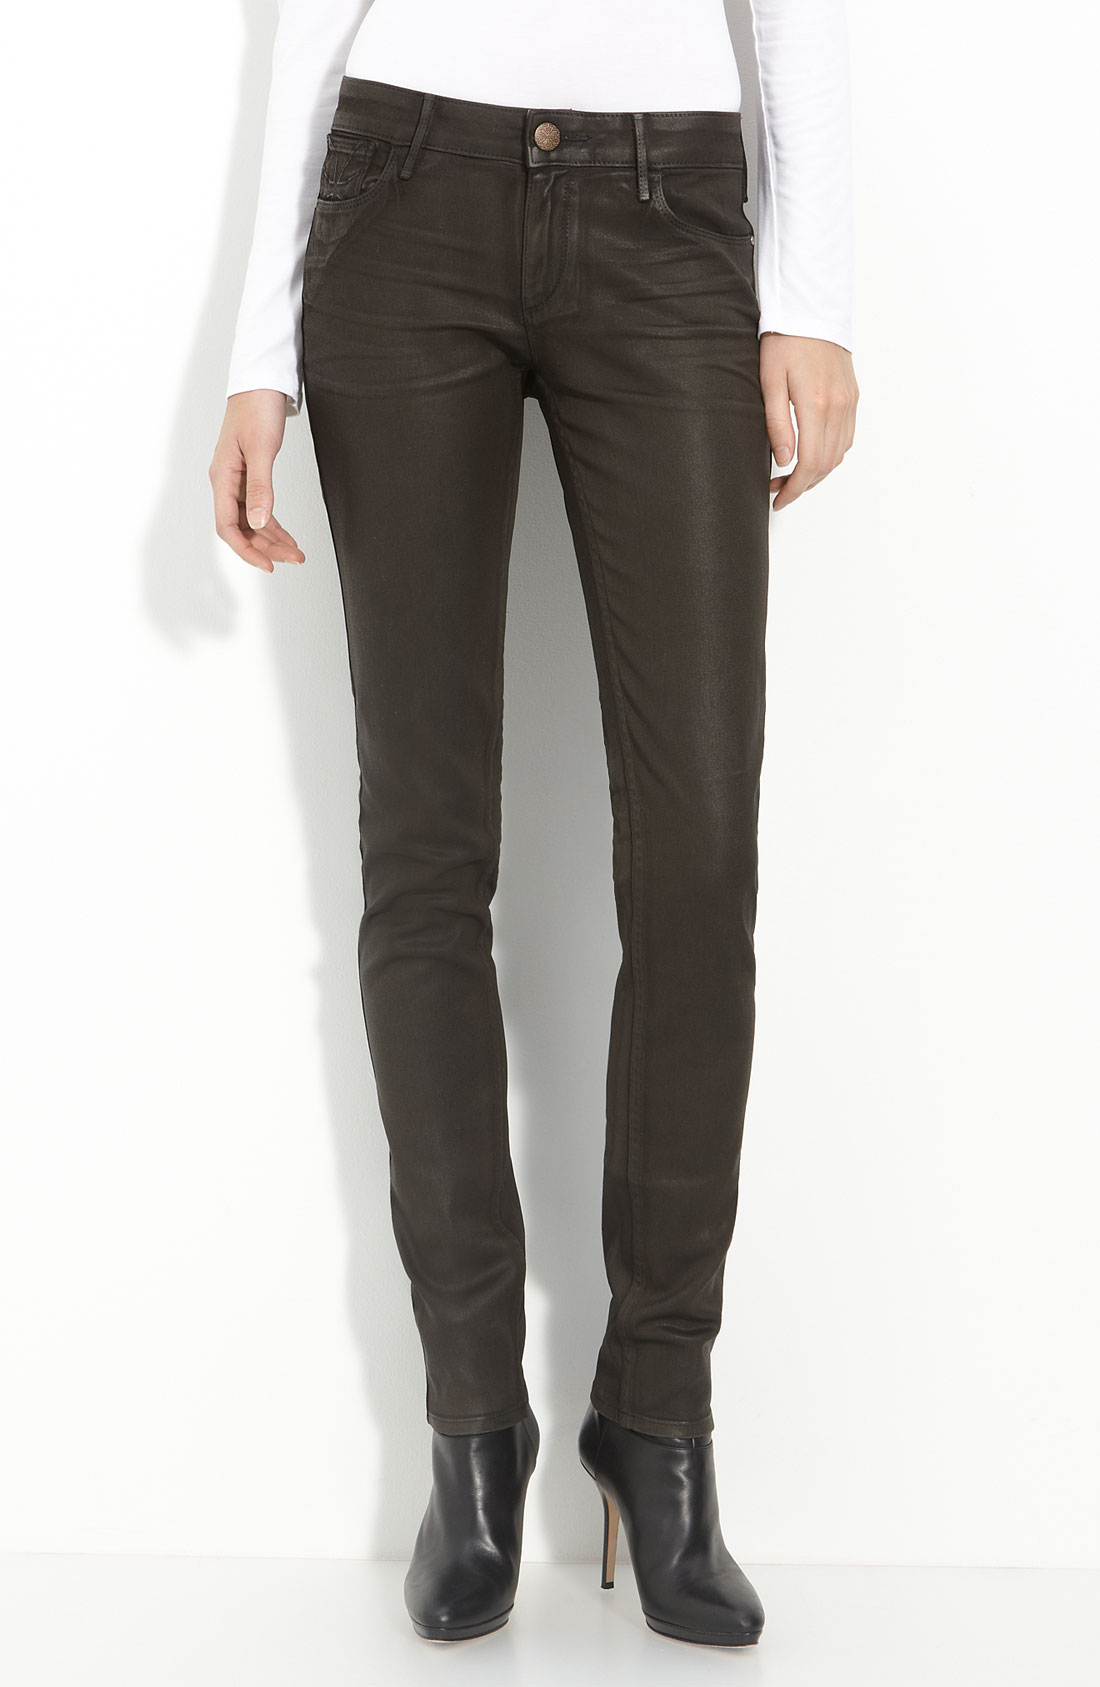 Habitual Alice Coated Skinny Stretch Jeans in Brown (chocolate) | Lyst